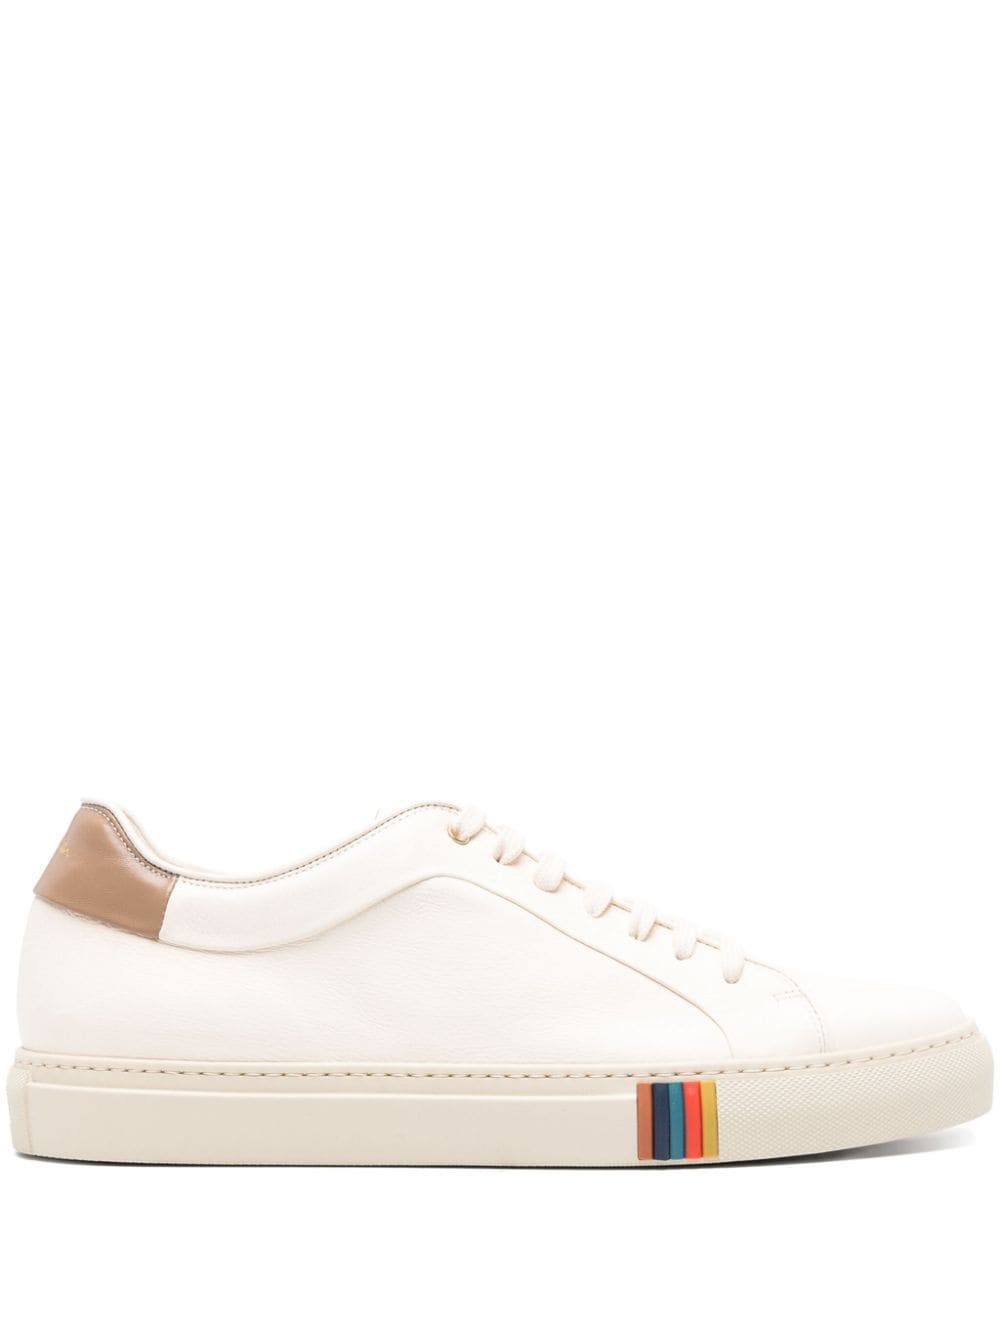 Paul Smith Basso leather sneakers - White von Paul Smith